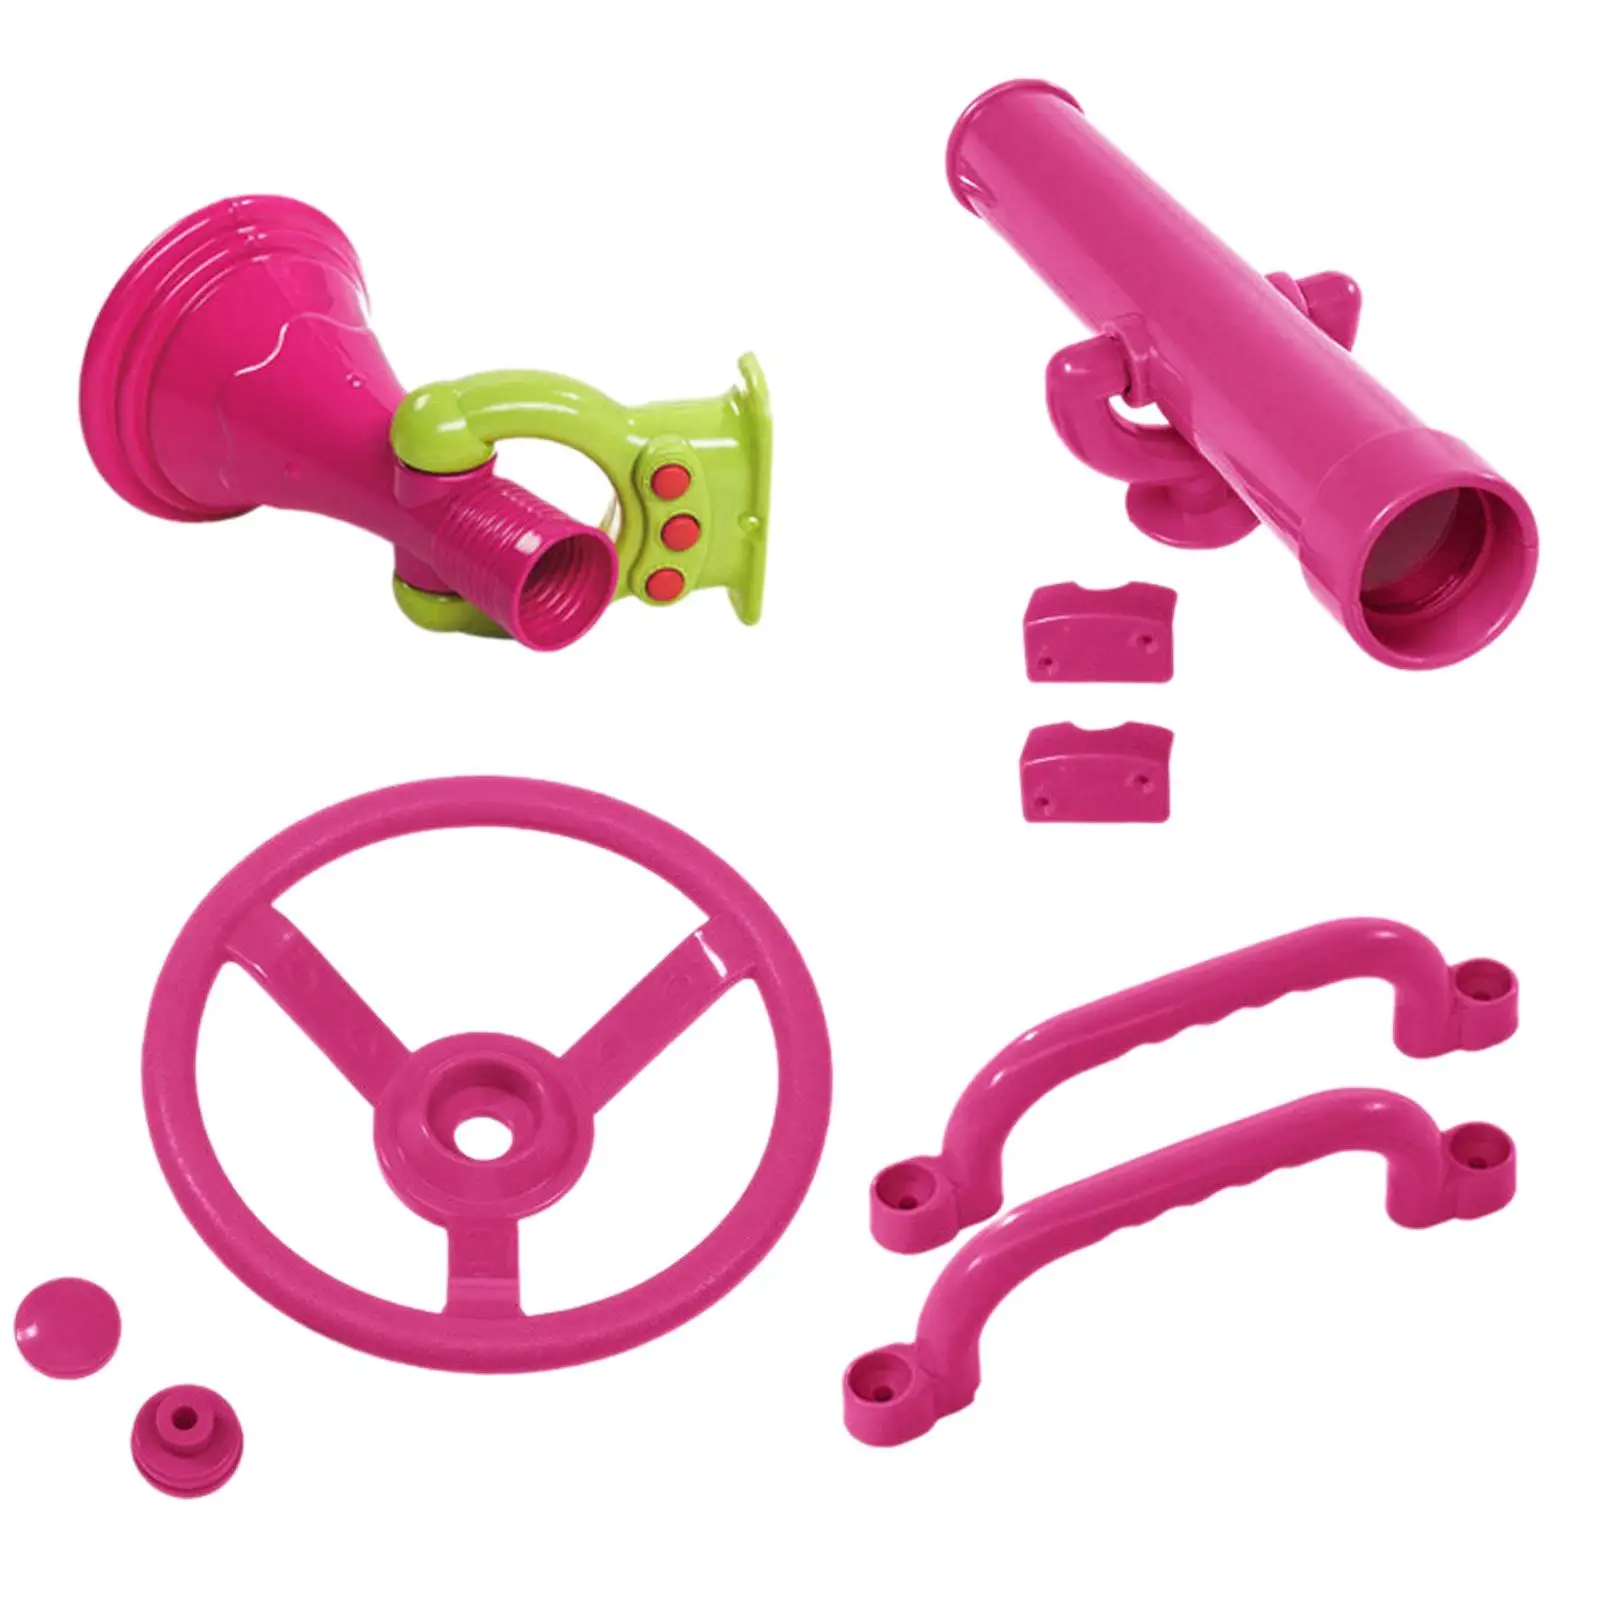 4 Pieces Playground Accessories Swingset Attachments Pink Pirate Telescope Pirate Ship Wheel for Kids for Backyard Swingset